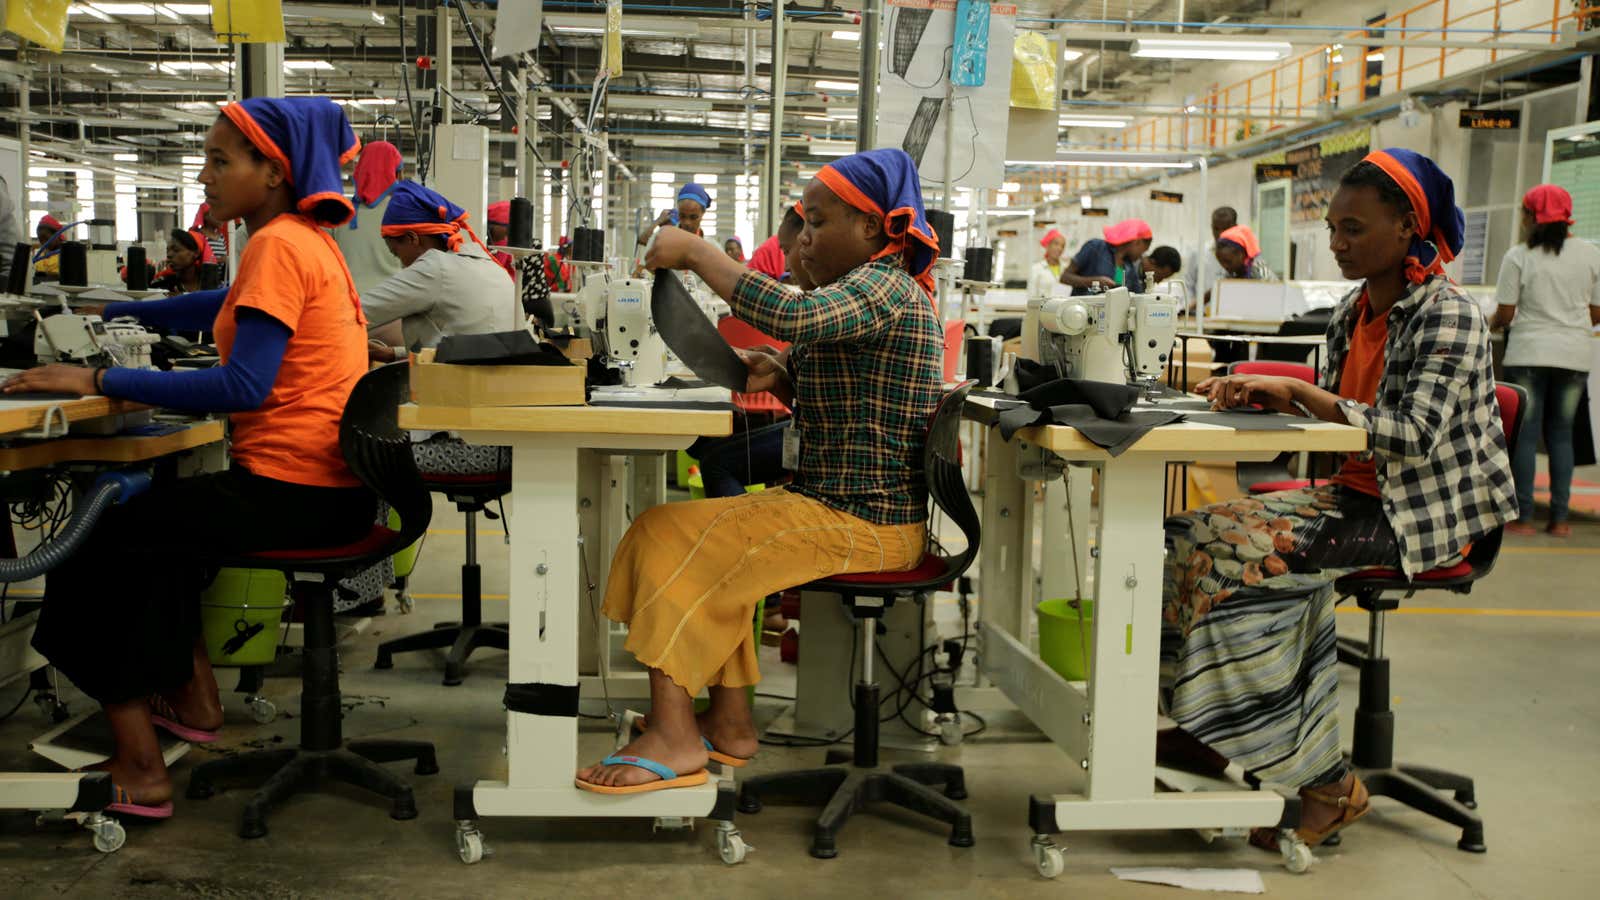 Inside the Indochine Apparel textile factory in Hawassa Industrial Park in Southern Nations, Nationalities and Peoples region, Ethiopia Nov. 17, 2017.